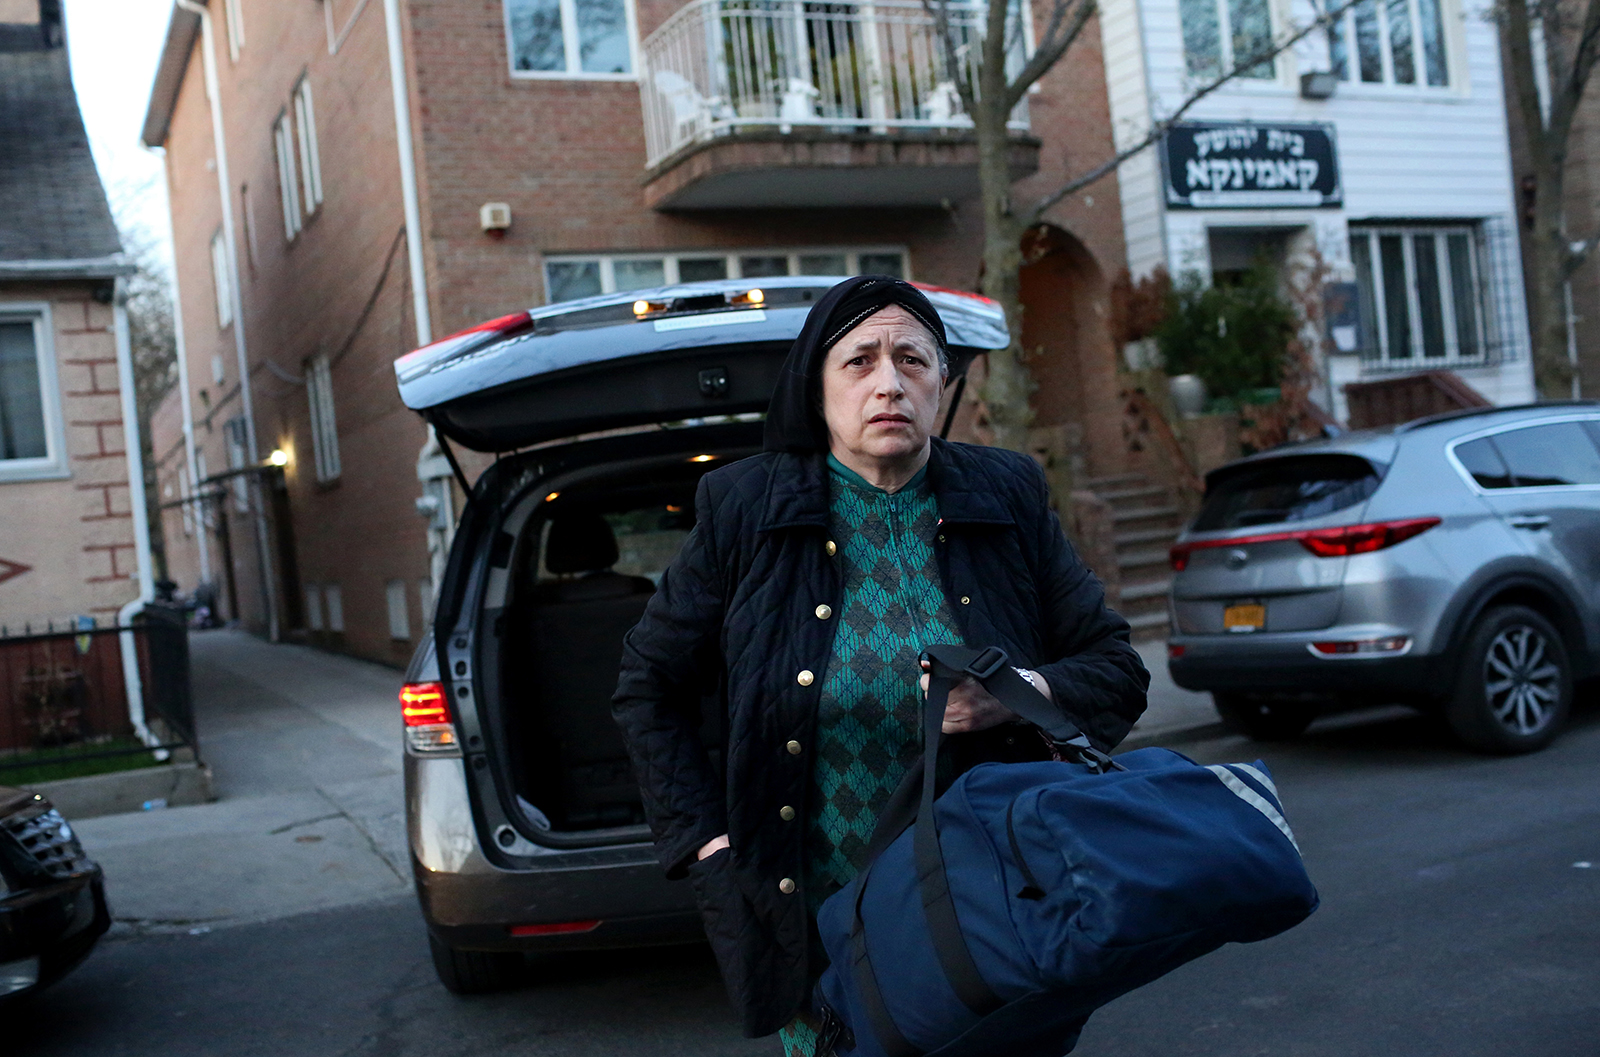 Ezras Nashim EMT Malky Felb arrives to an exercise drill at the Ezras Nashim office in Brooklyn, NY on April 06, 2021. (Photo by: Yana Paskova for The New York Times/the National Geographic Society)